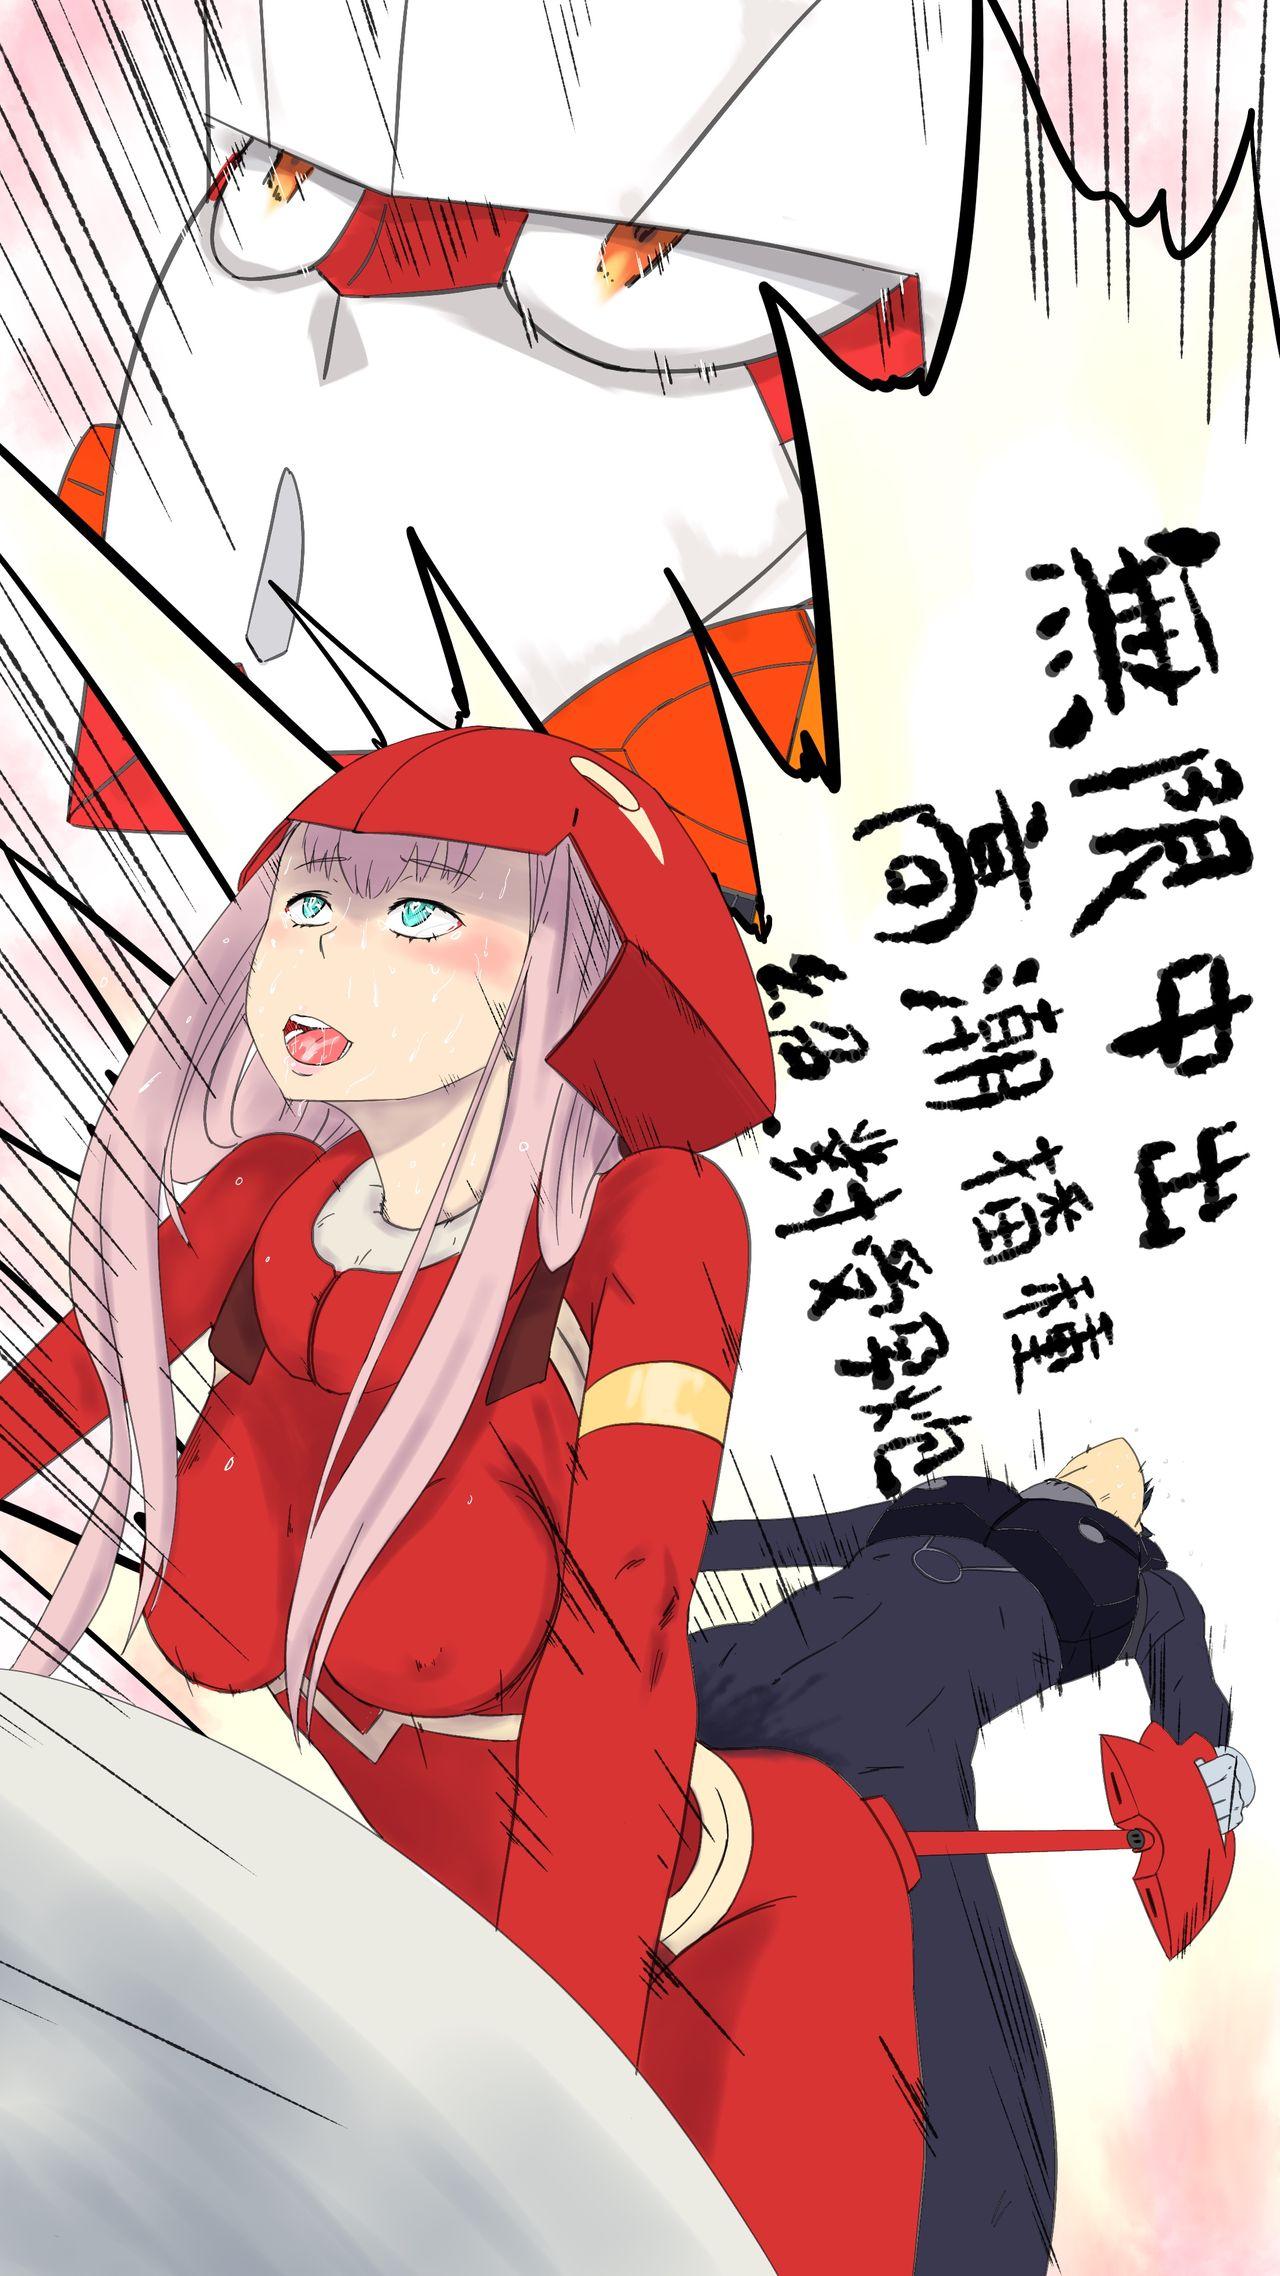 [supralpaca] Ding-a-ling in the FranXY (DARLING in the FRANXX) [Chinese] 5